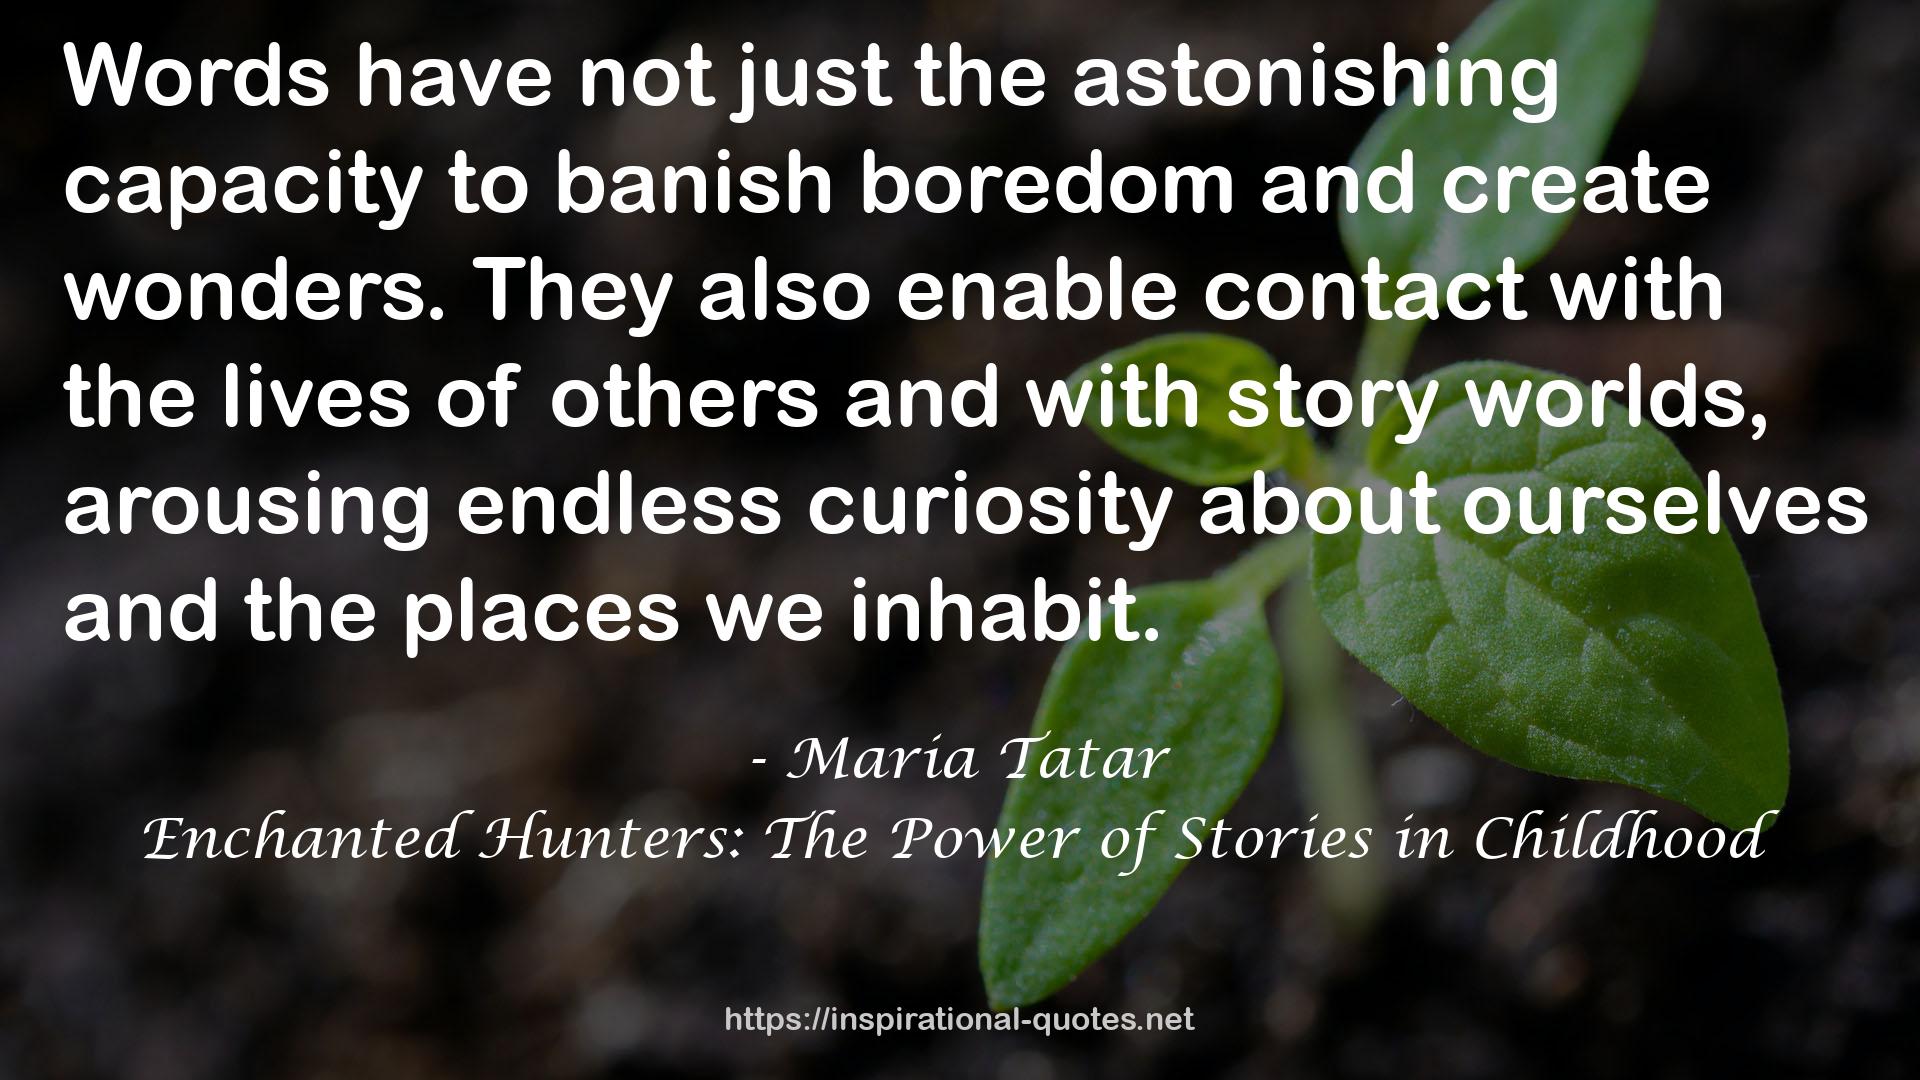 Enchanted Hunters: The Power of Stories in Childhood QUOTES